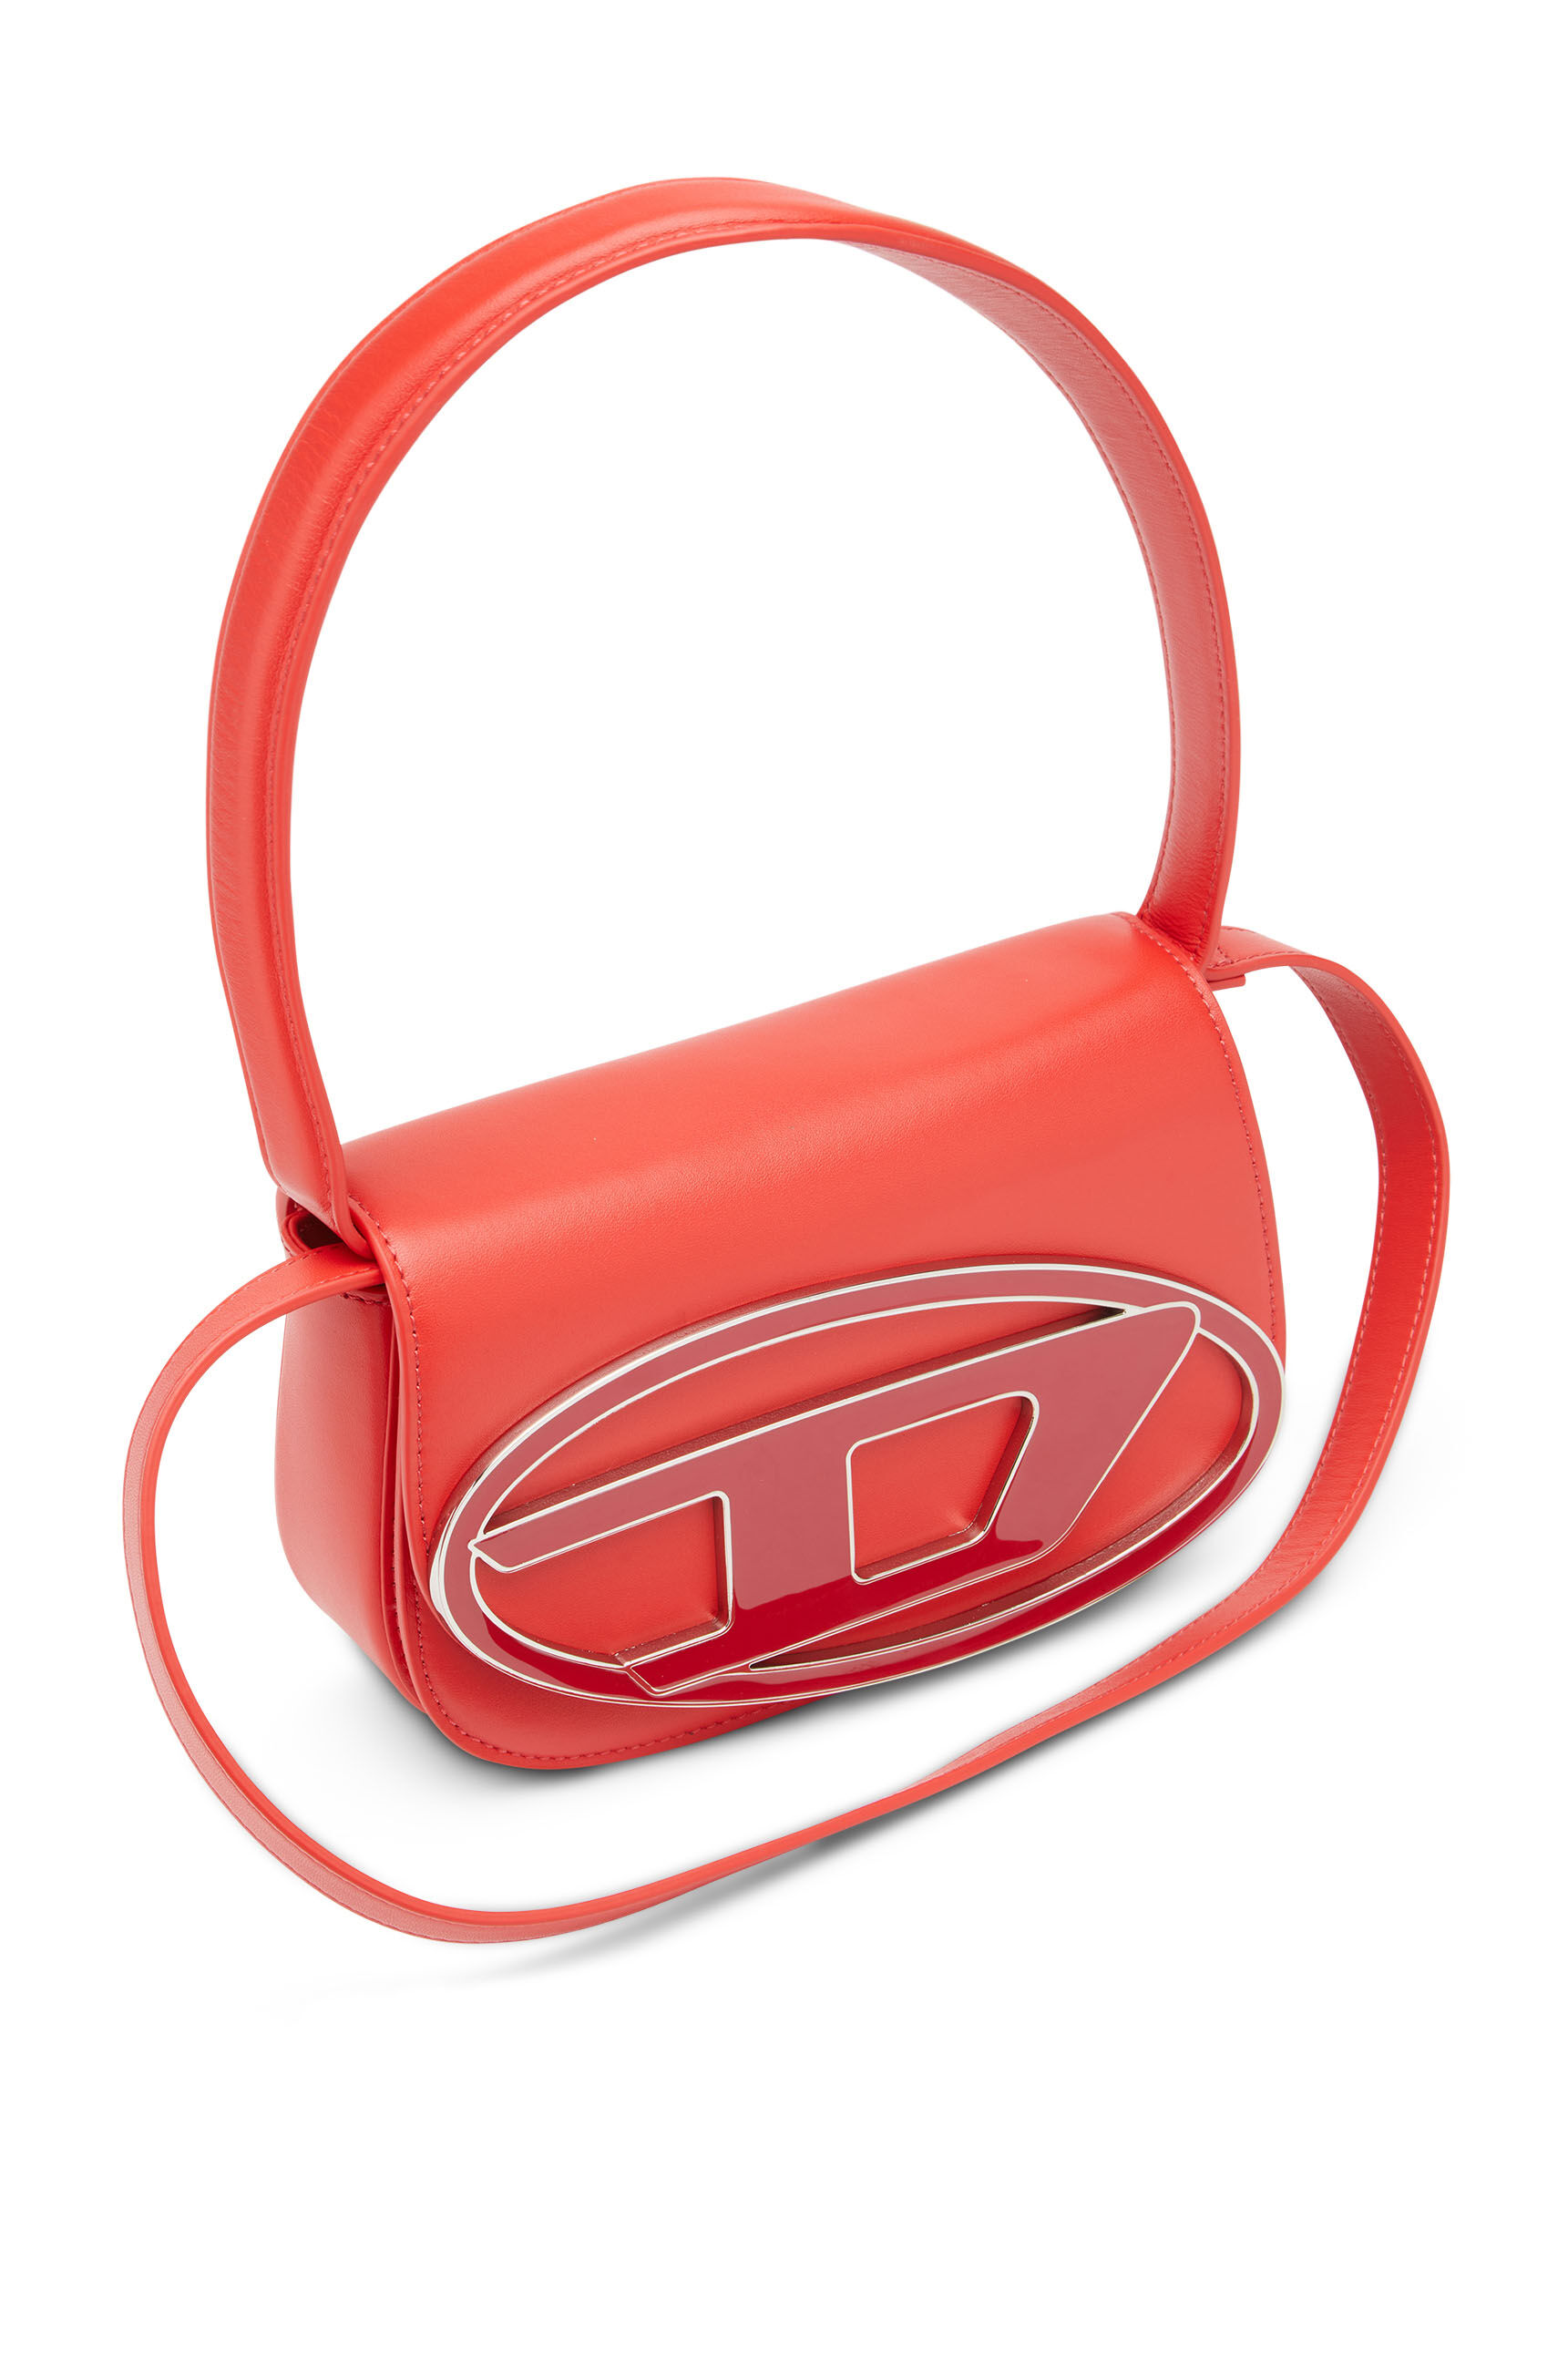 Diesel - 1DR, Woman 1DR-Iconic shoulder bag in nappa leather in Red - Image 2